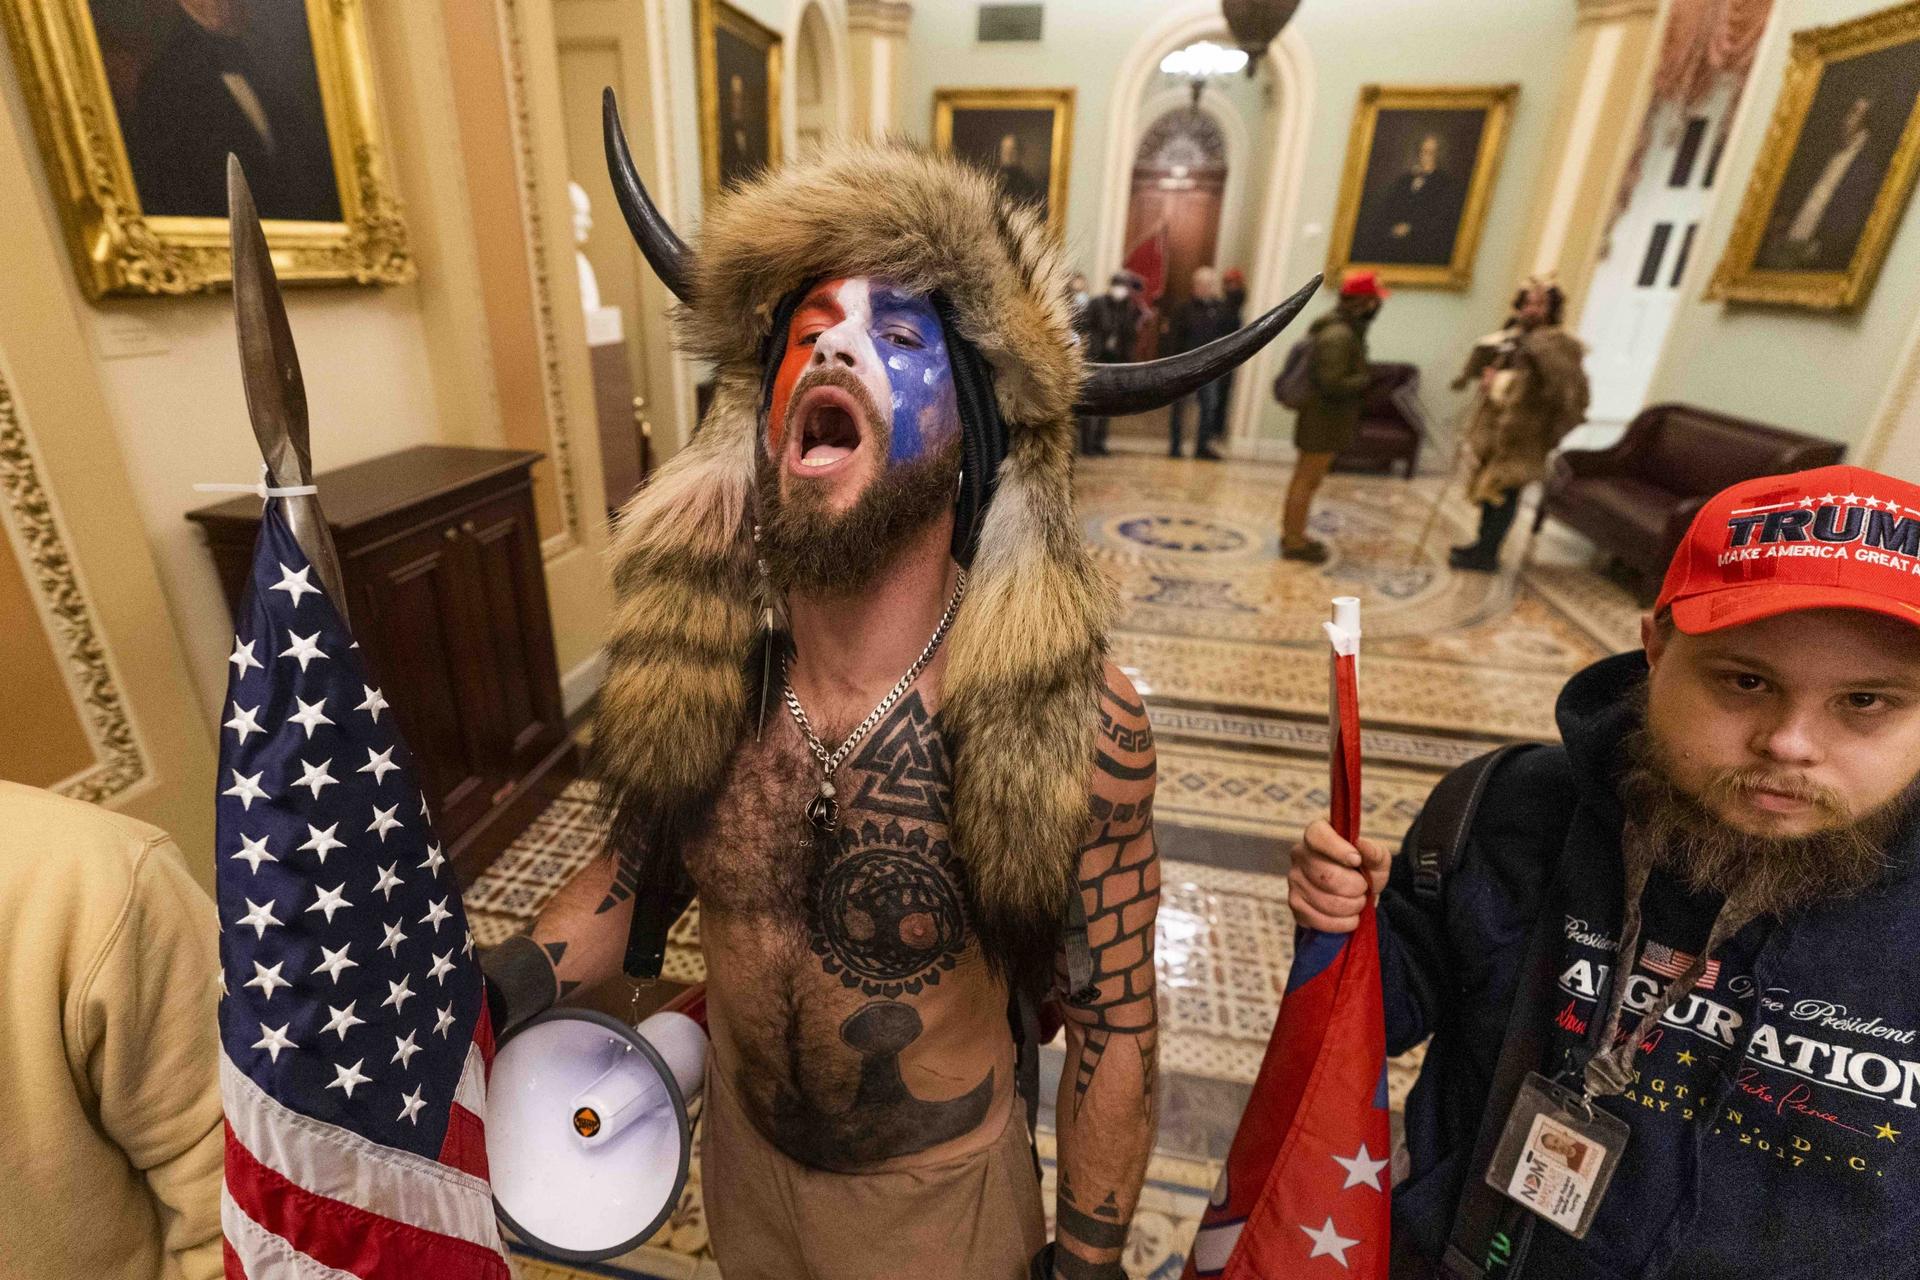 A supporter of President Donald Trump wearing horns and animal skins on his head chants outside the Senate chamber inside the Capitol, Wednesday, Jan. 6, 2021, in Washington, DC.